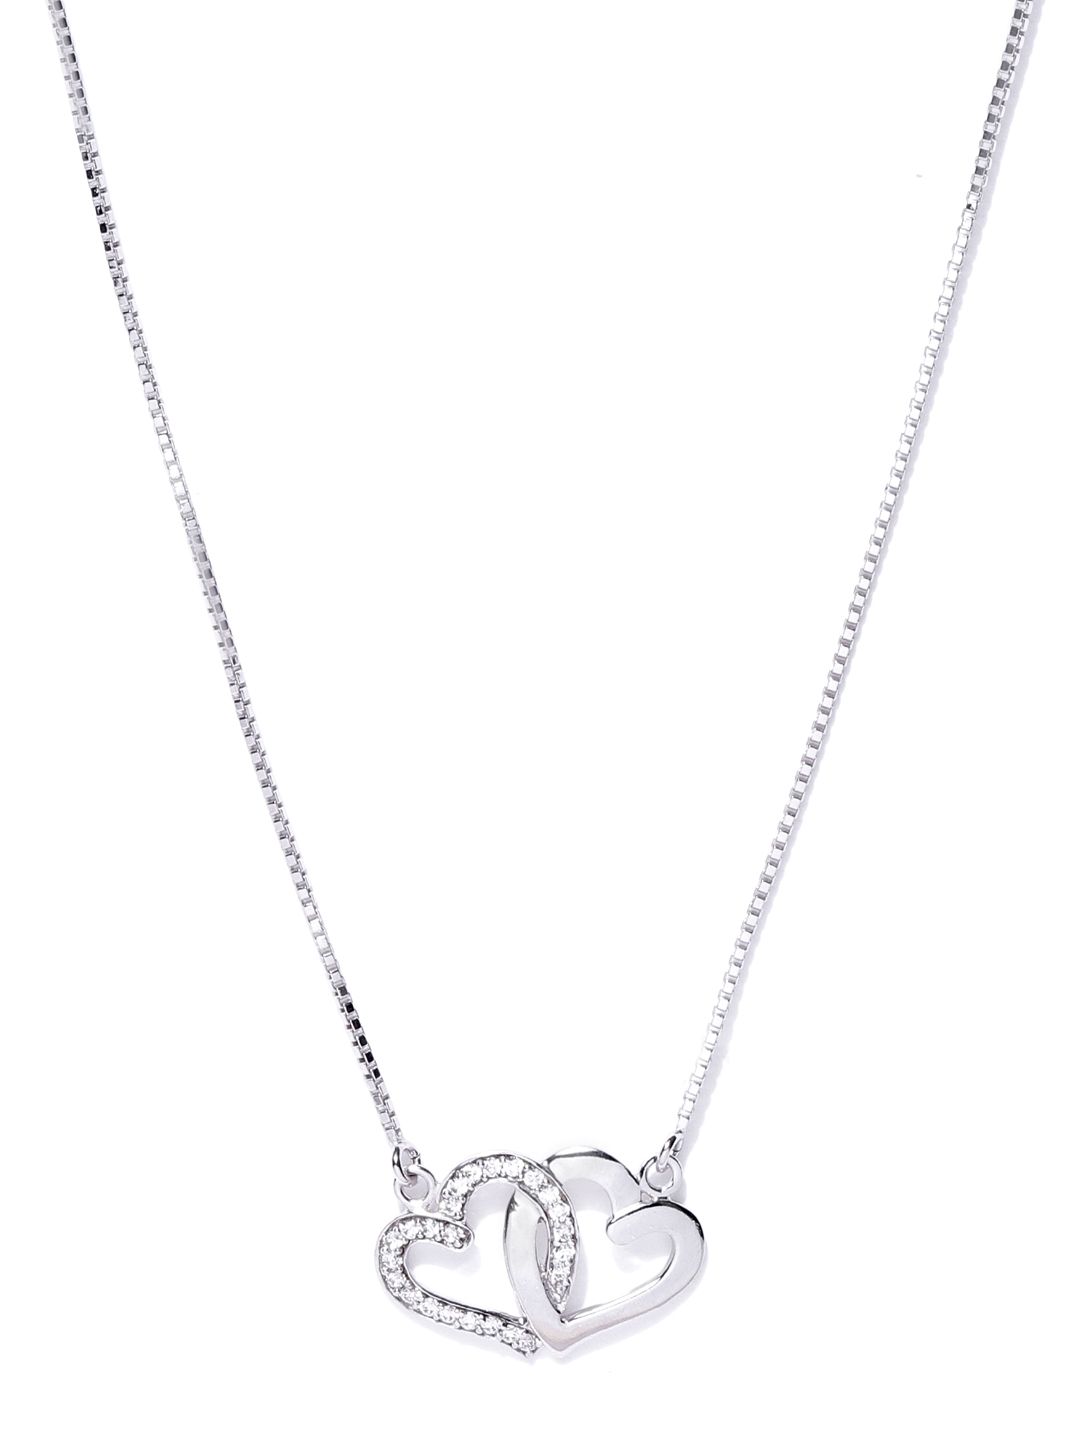 Carlton London Silver-Toned Rhodium-Plated CZ-Studded Necklace Price in India